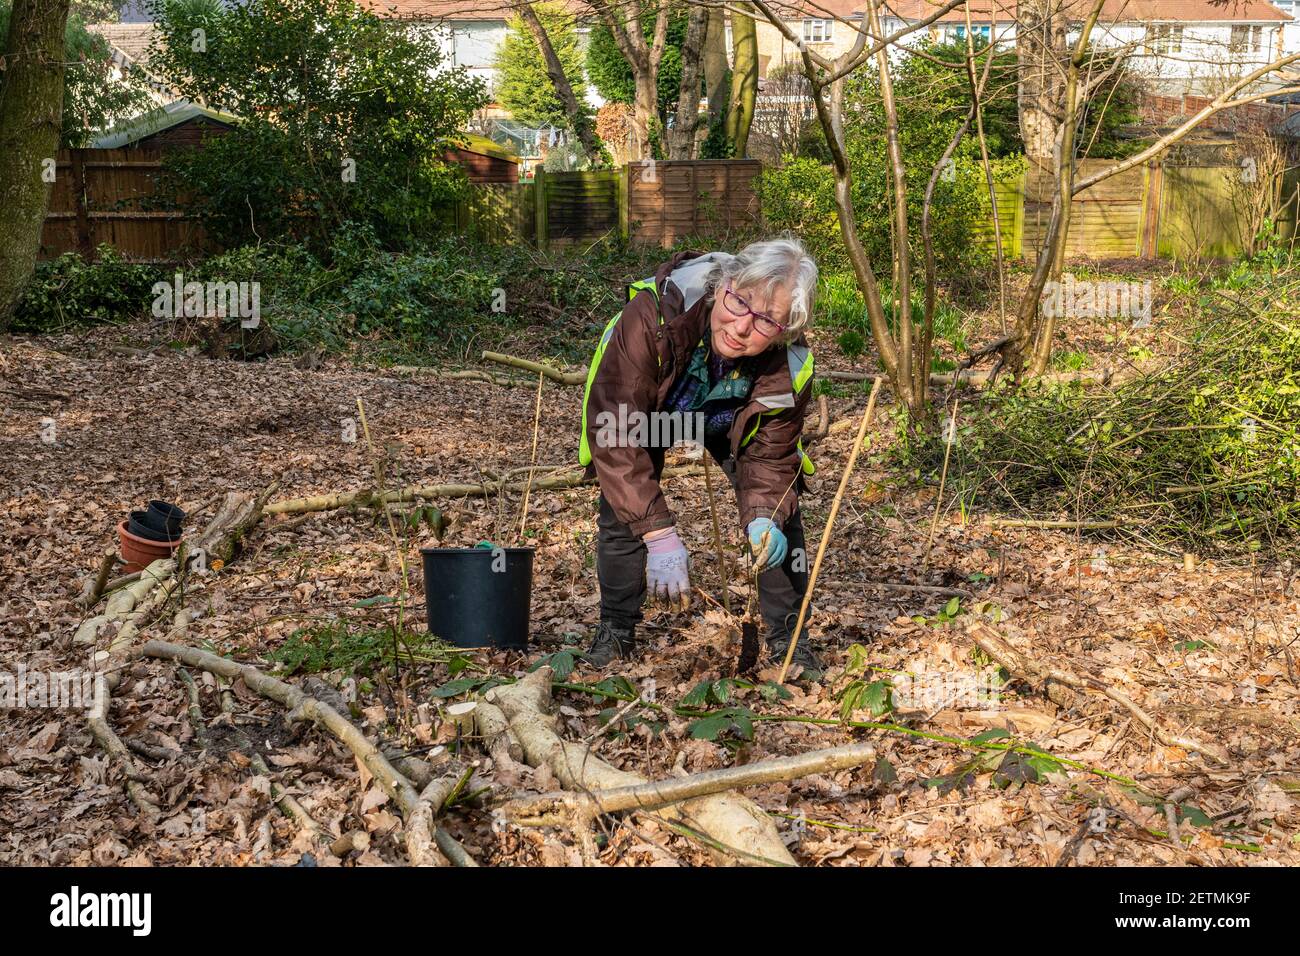 Female conservation volunteer planting trees in a woodland area near houses, Surrey, England, UK Stock Photo